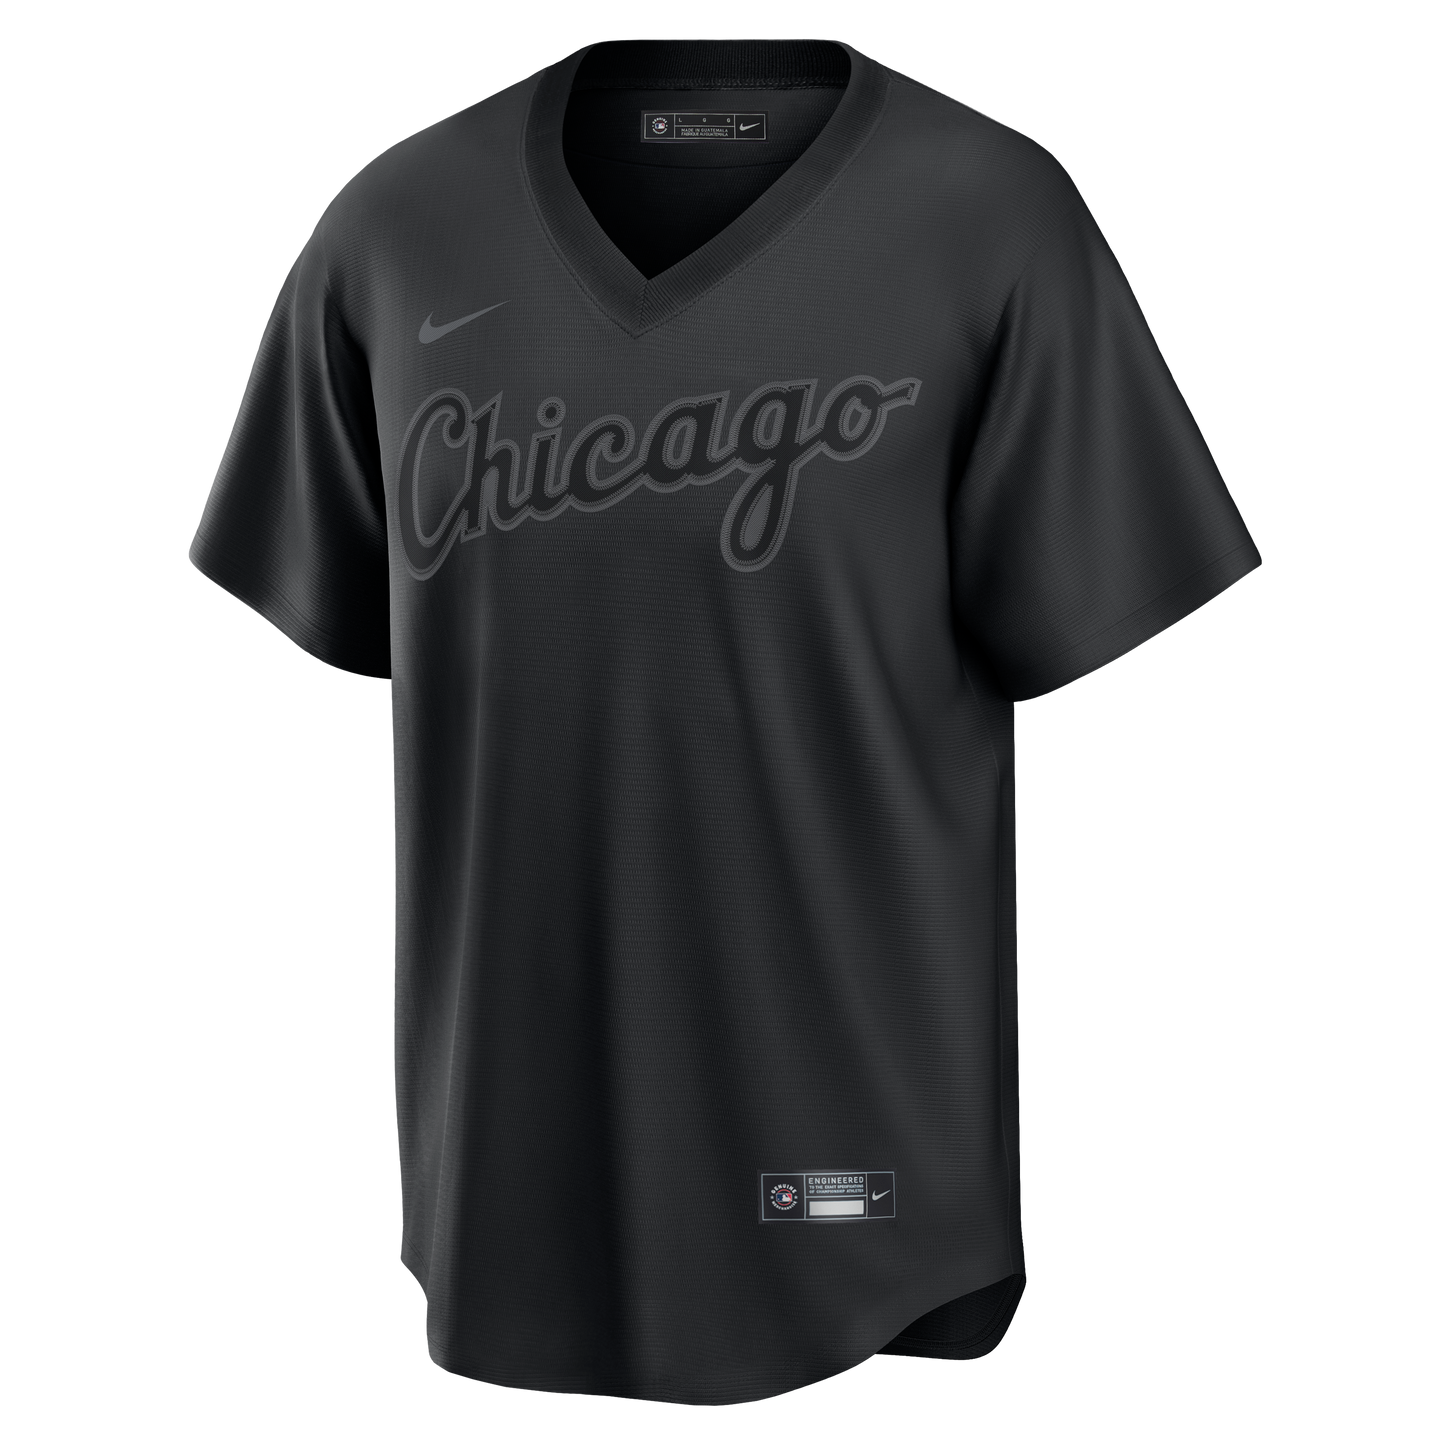 Tim Anderson Chicago White Sox Nike Pitch Black Jersey